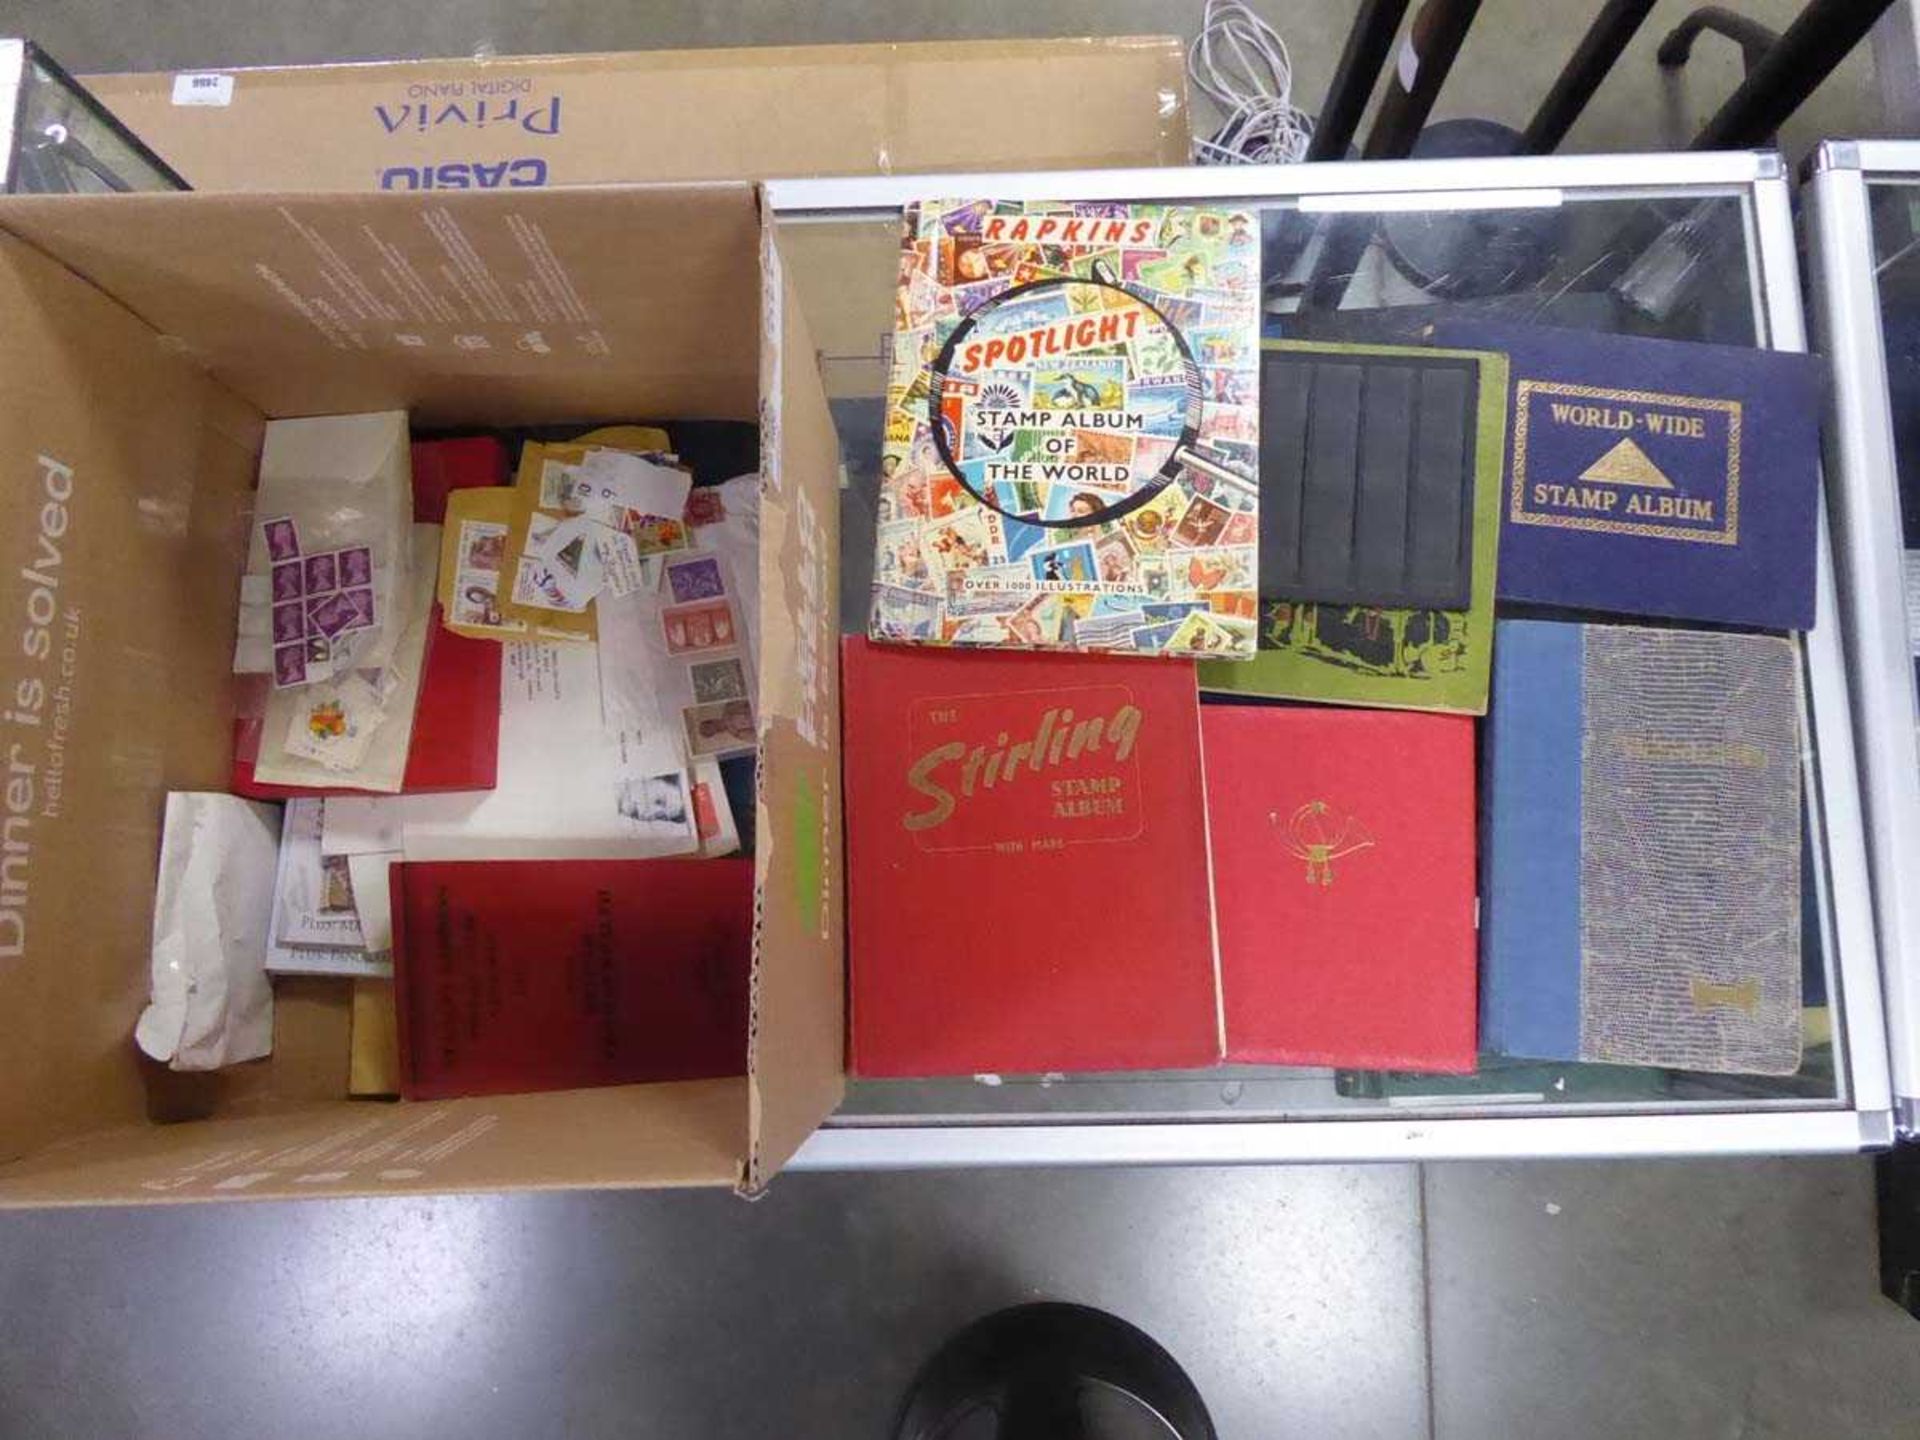 Box containing various stamp albums with various worldwide stamps including a German stockbook album